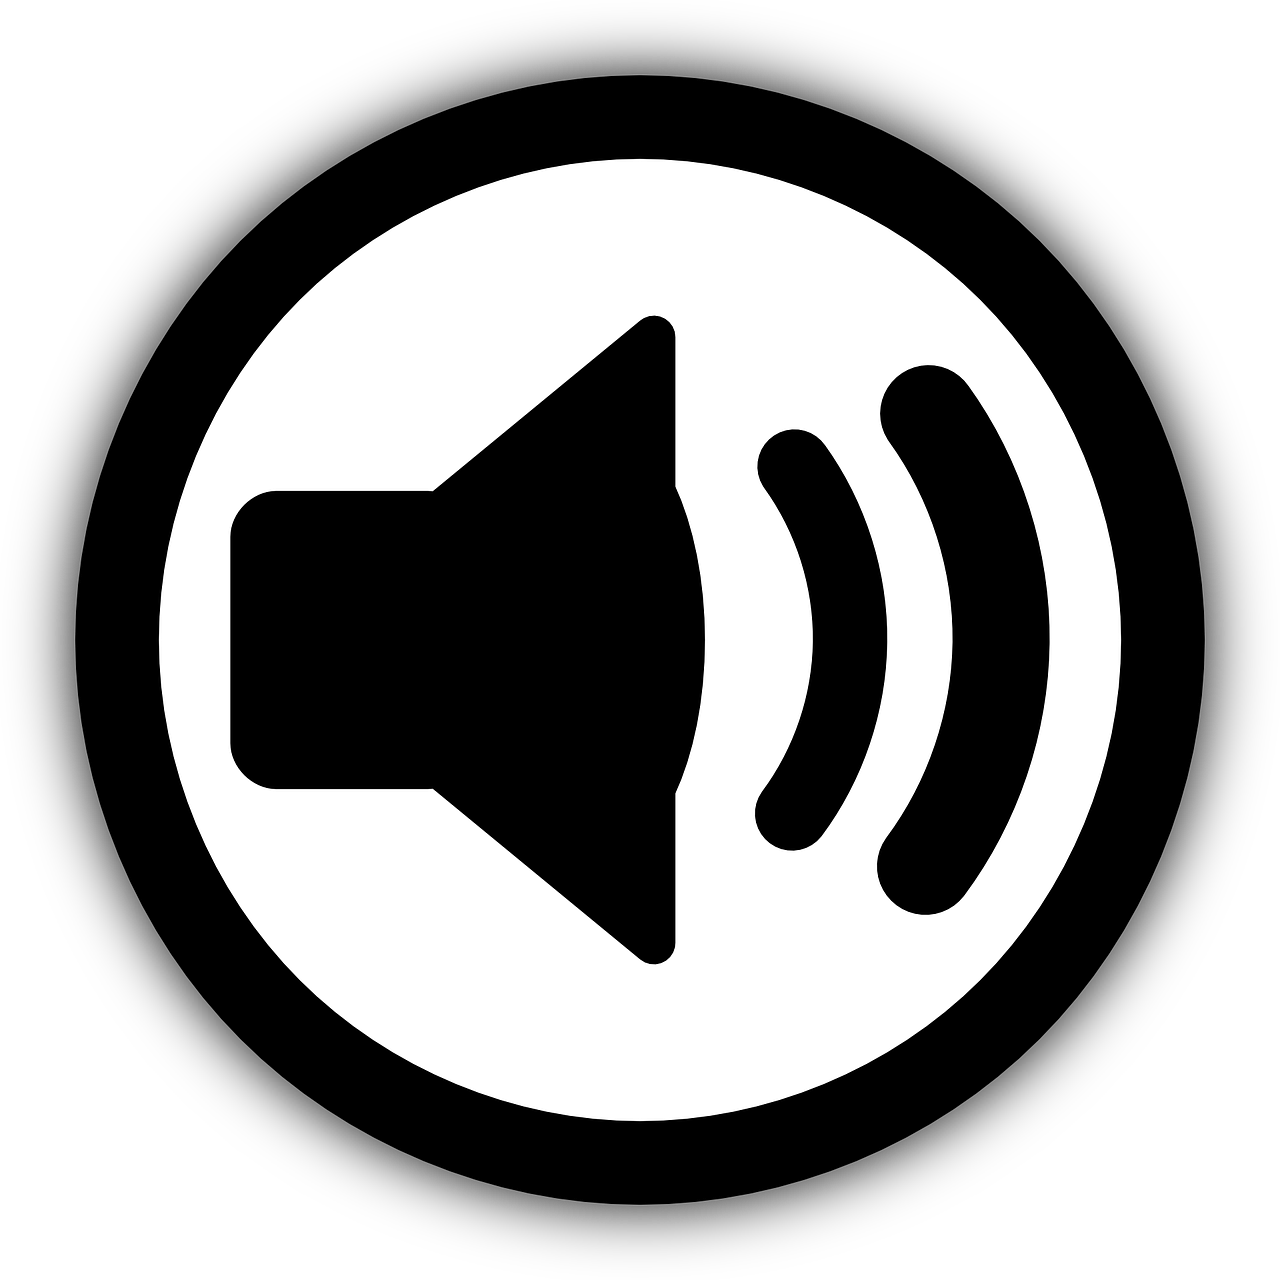 A Black And White Circle With A Speaker Symbol